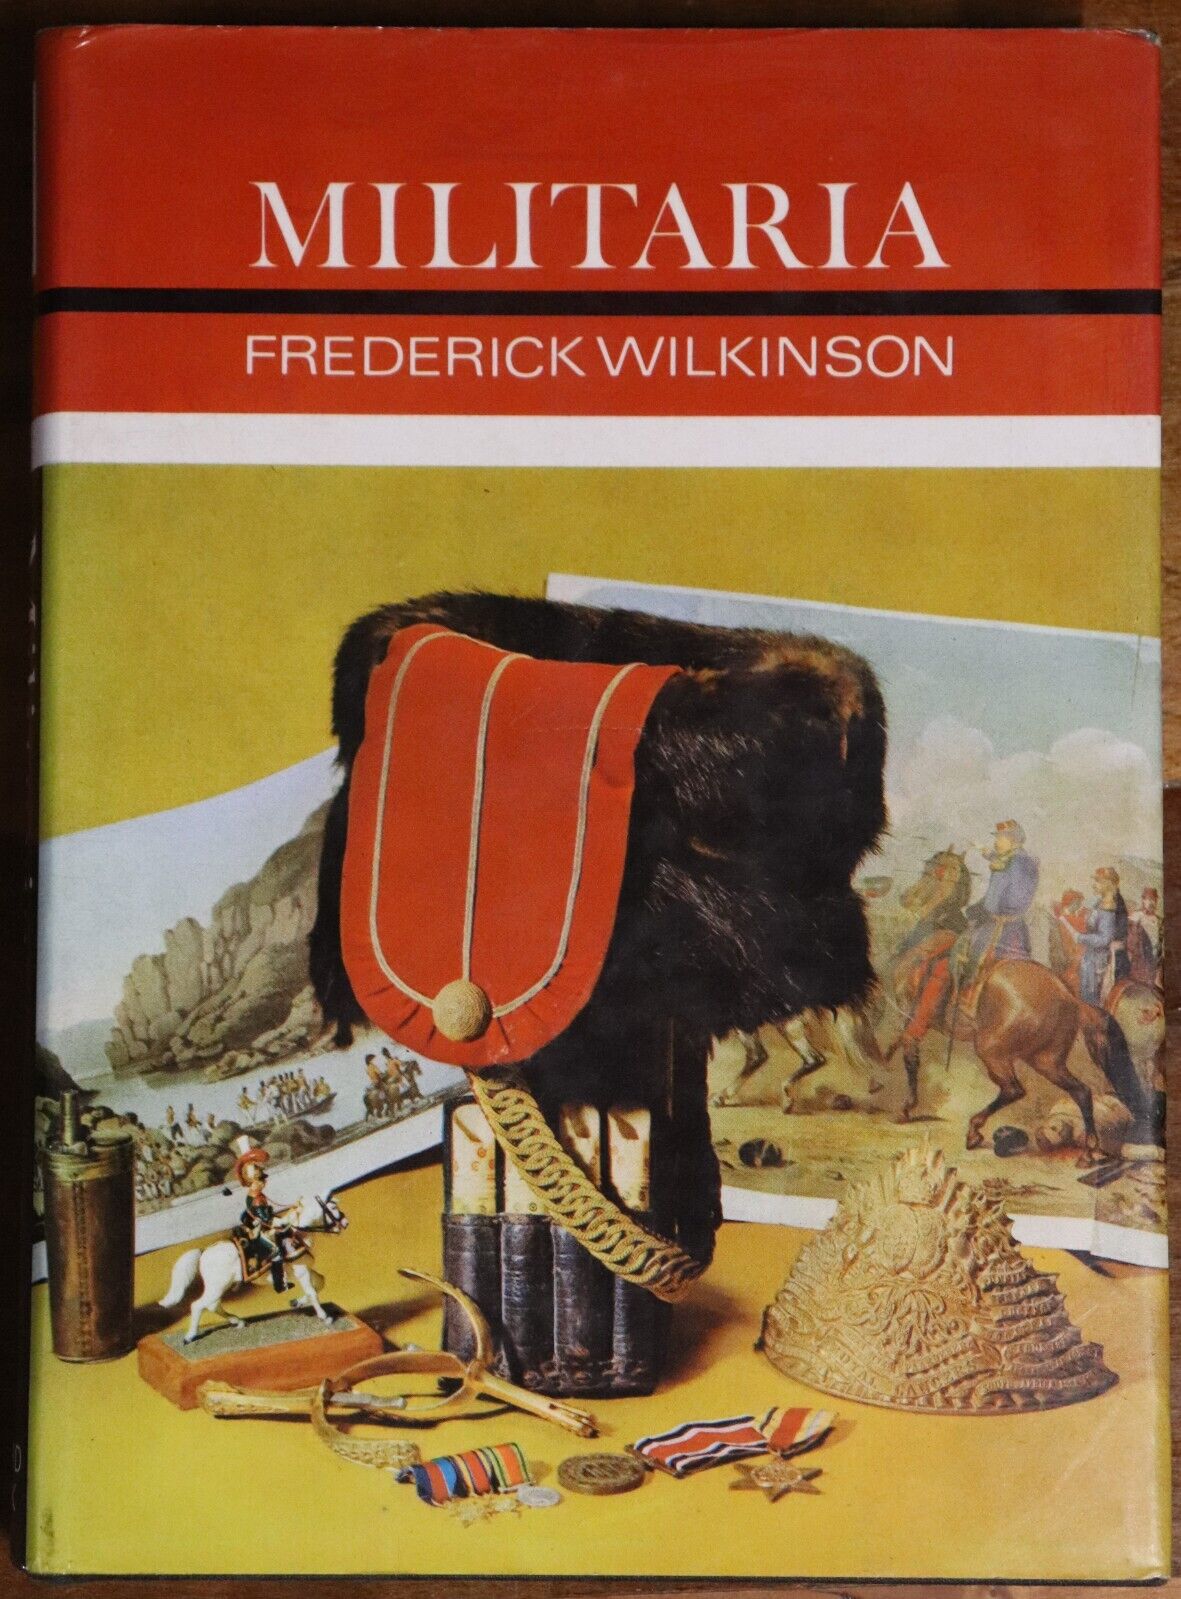 Militaria by Frederick Wilkinson - 1969 - 1st Edition Military Collectibles Book